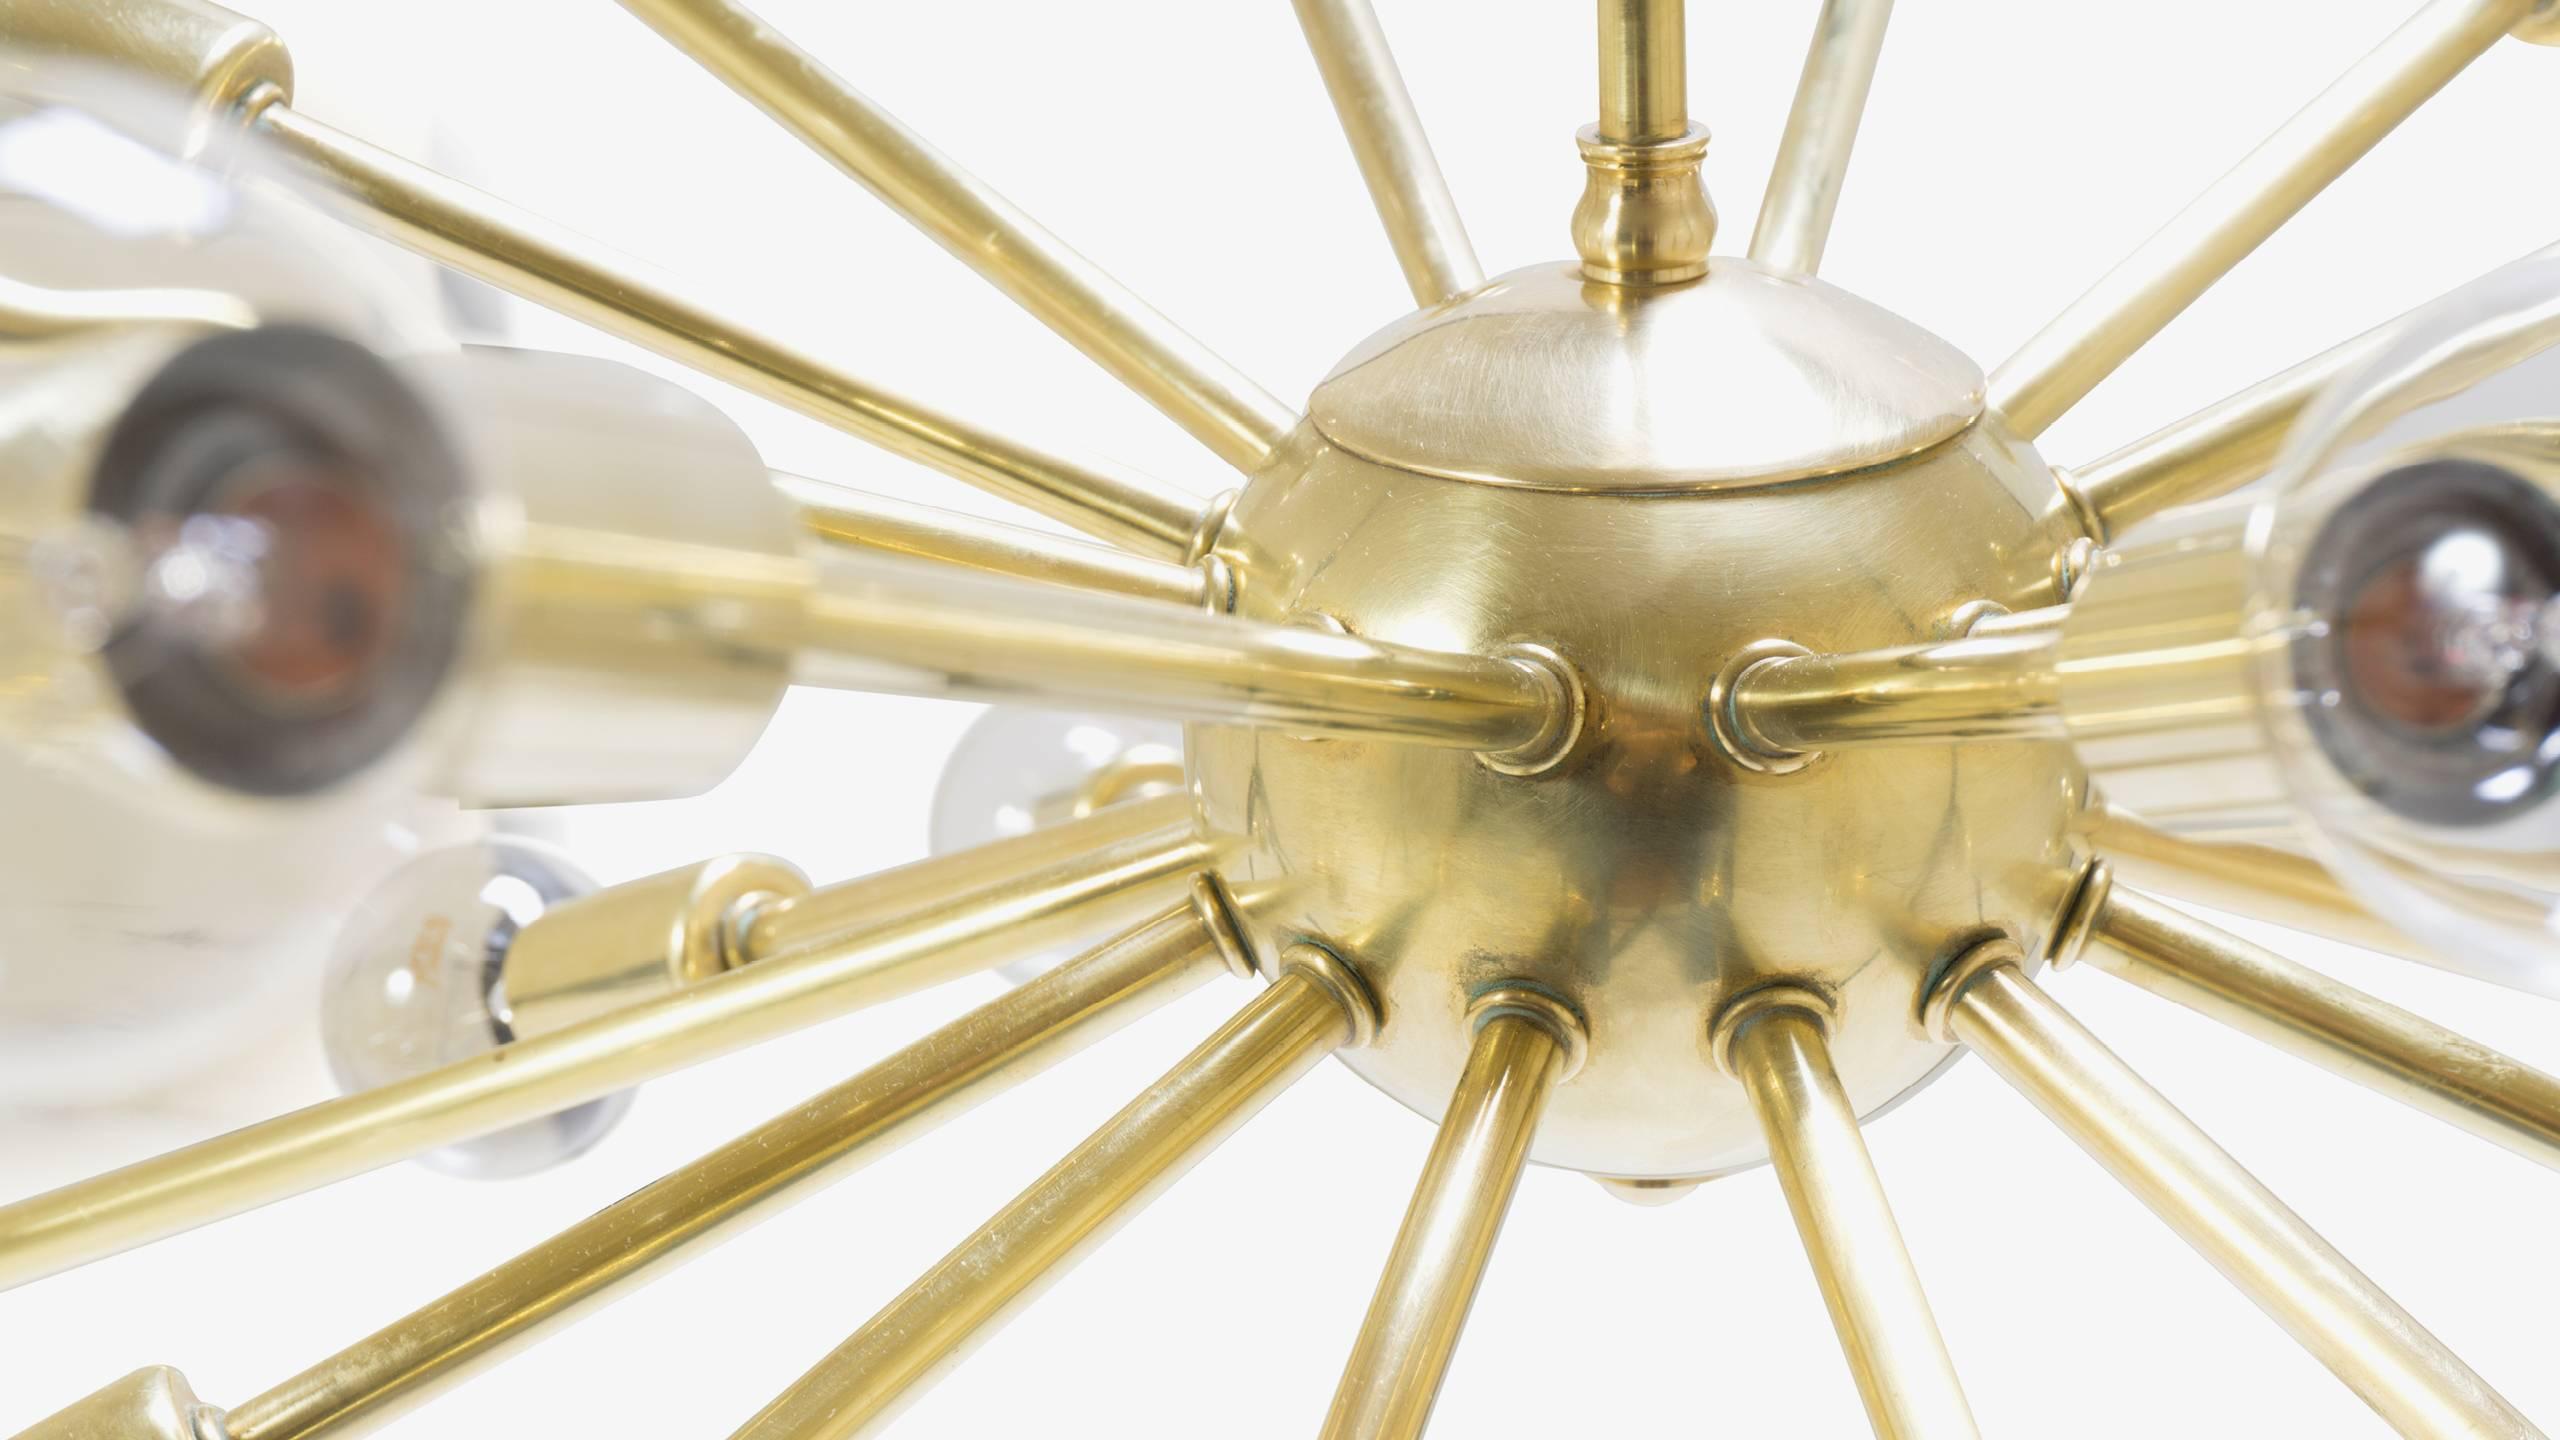 A wonderfully restored "Sputnik" pendant chandelier is the quintessential item that any collector of the Mid-Century needs in their home. This piece features 28-bulb lamping supported by its polished brass body. The brass is in excellent